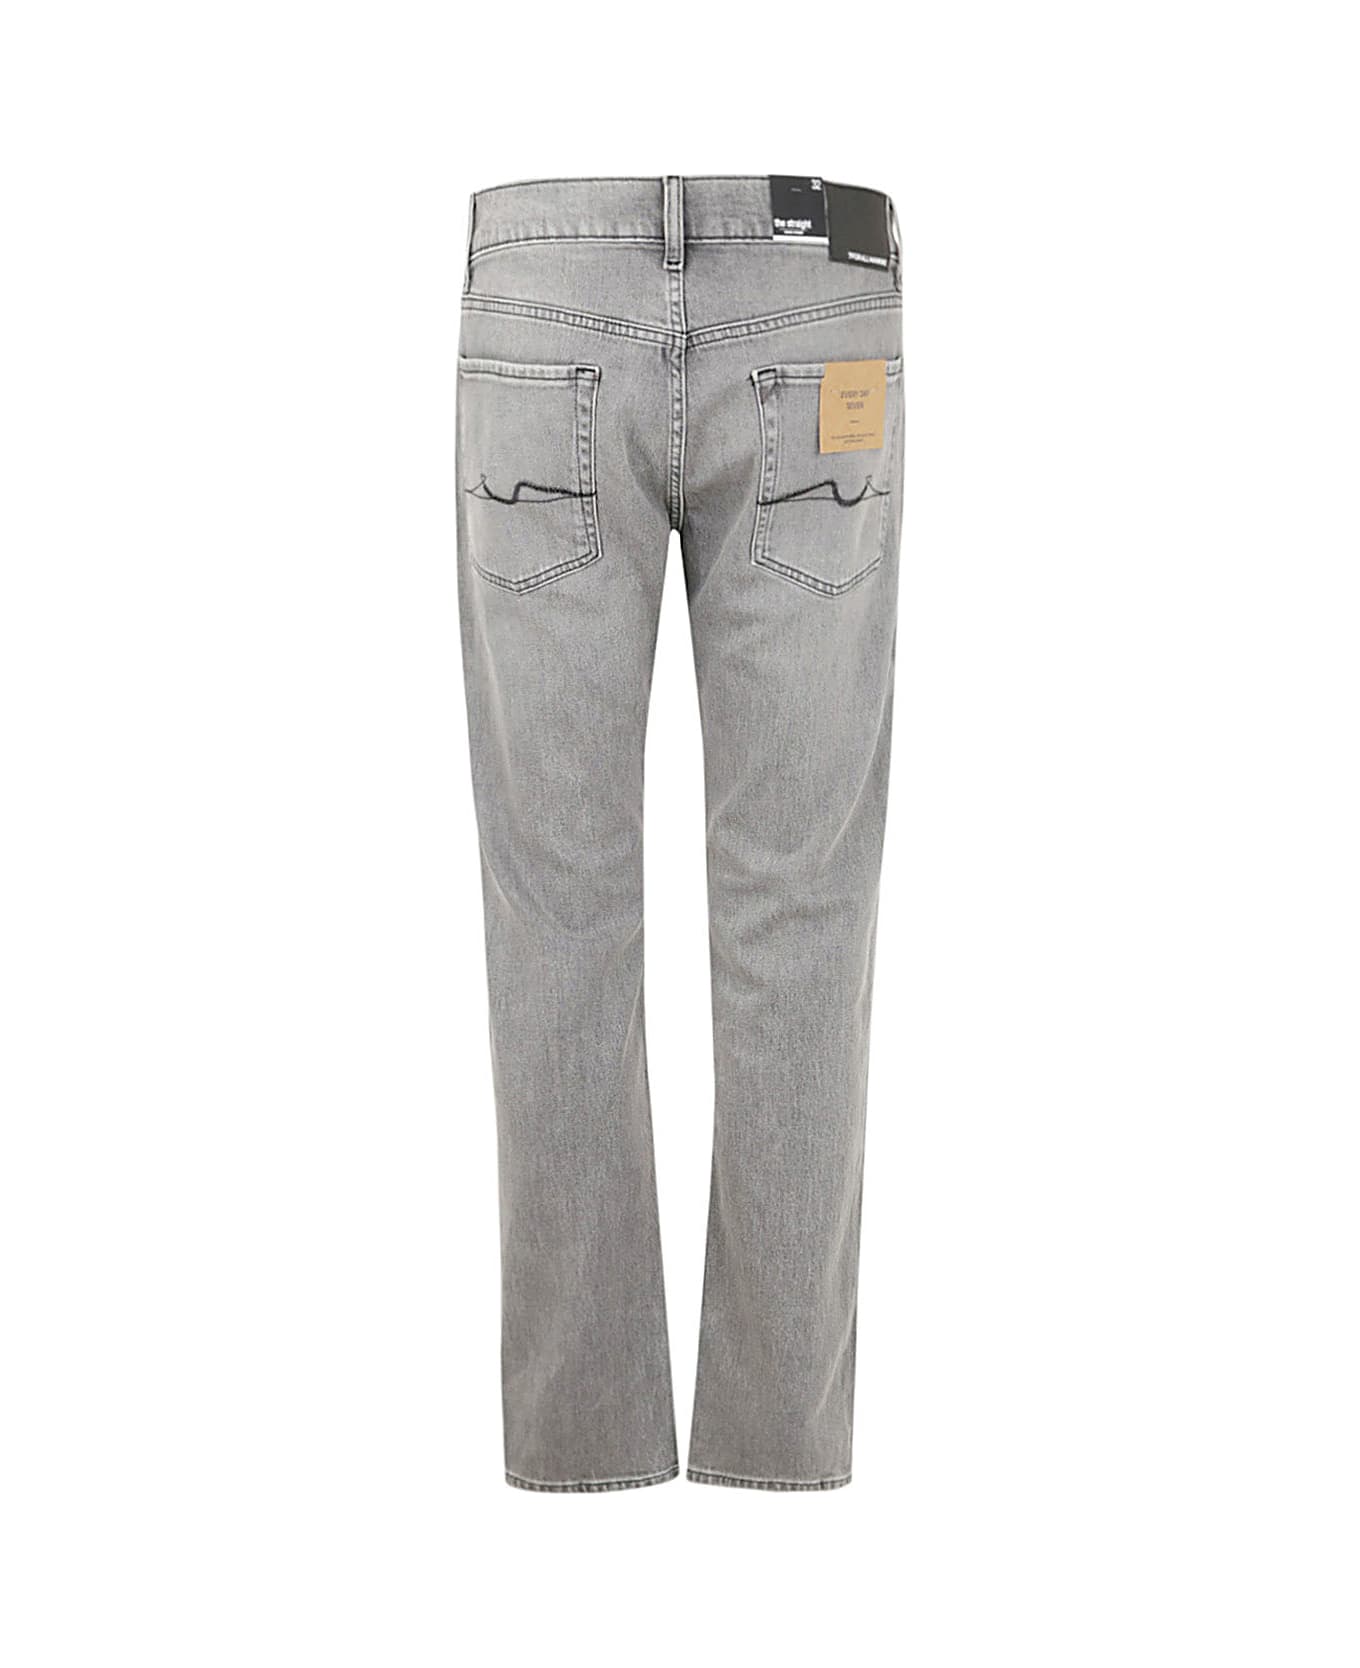 7 For All Mankind The Straight Growth Jeans - Grey デニム